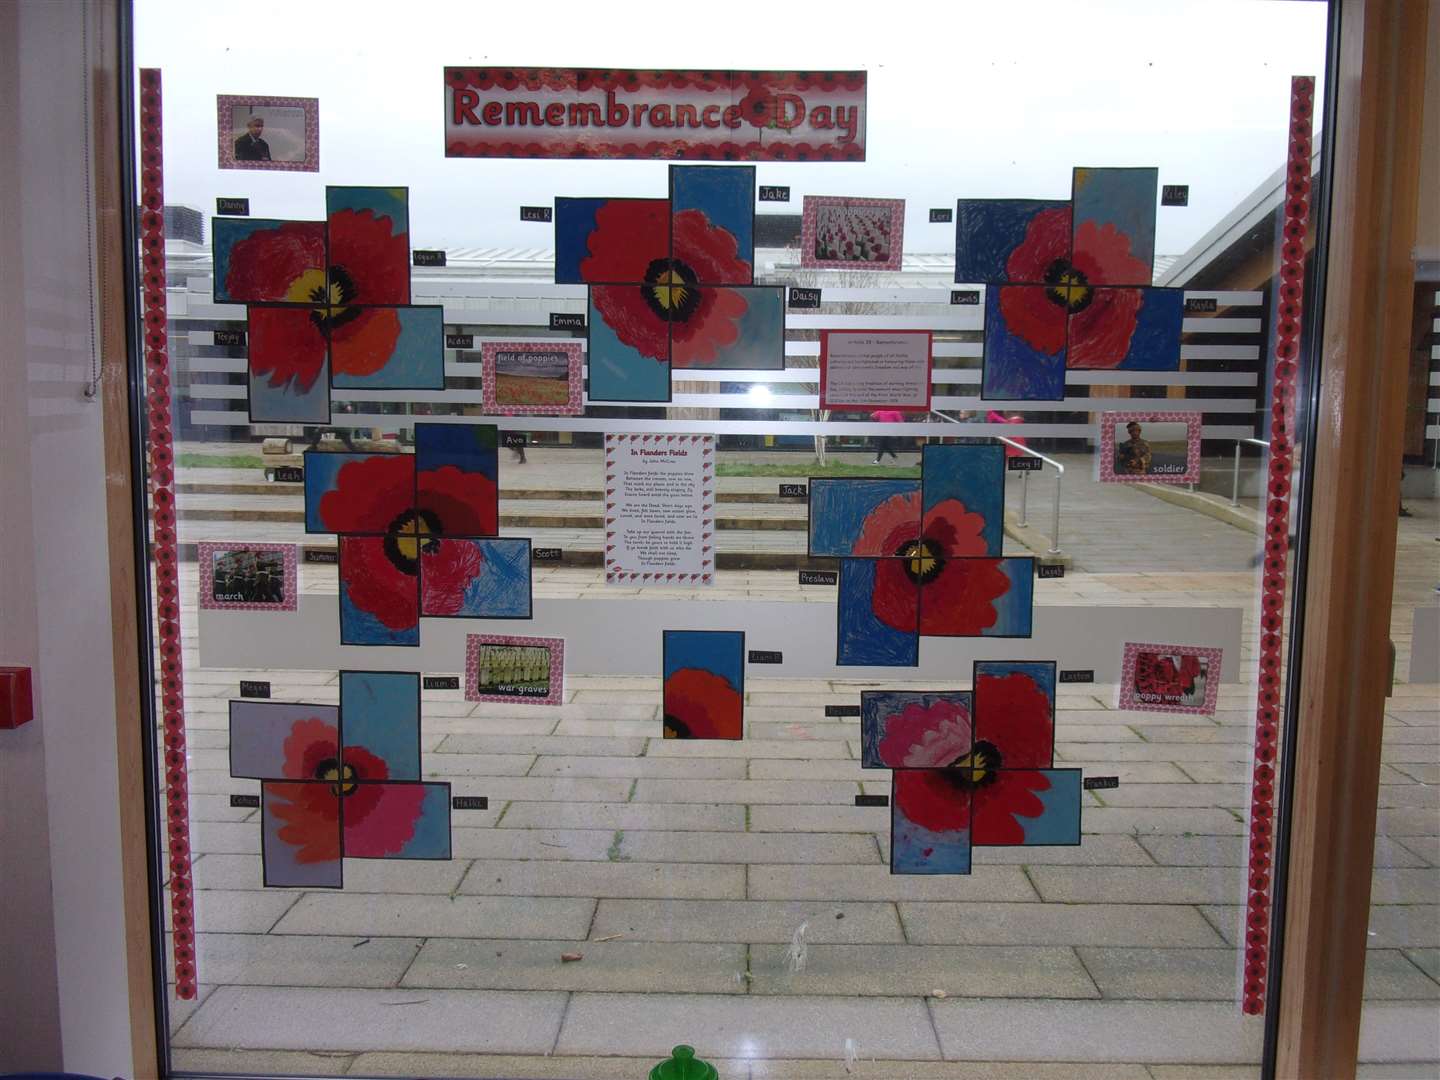 Some of the remembrance materials produced by the children.